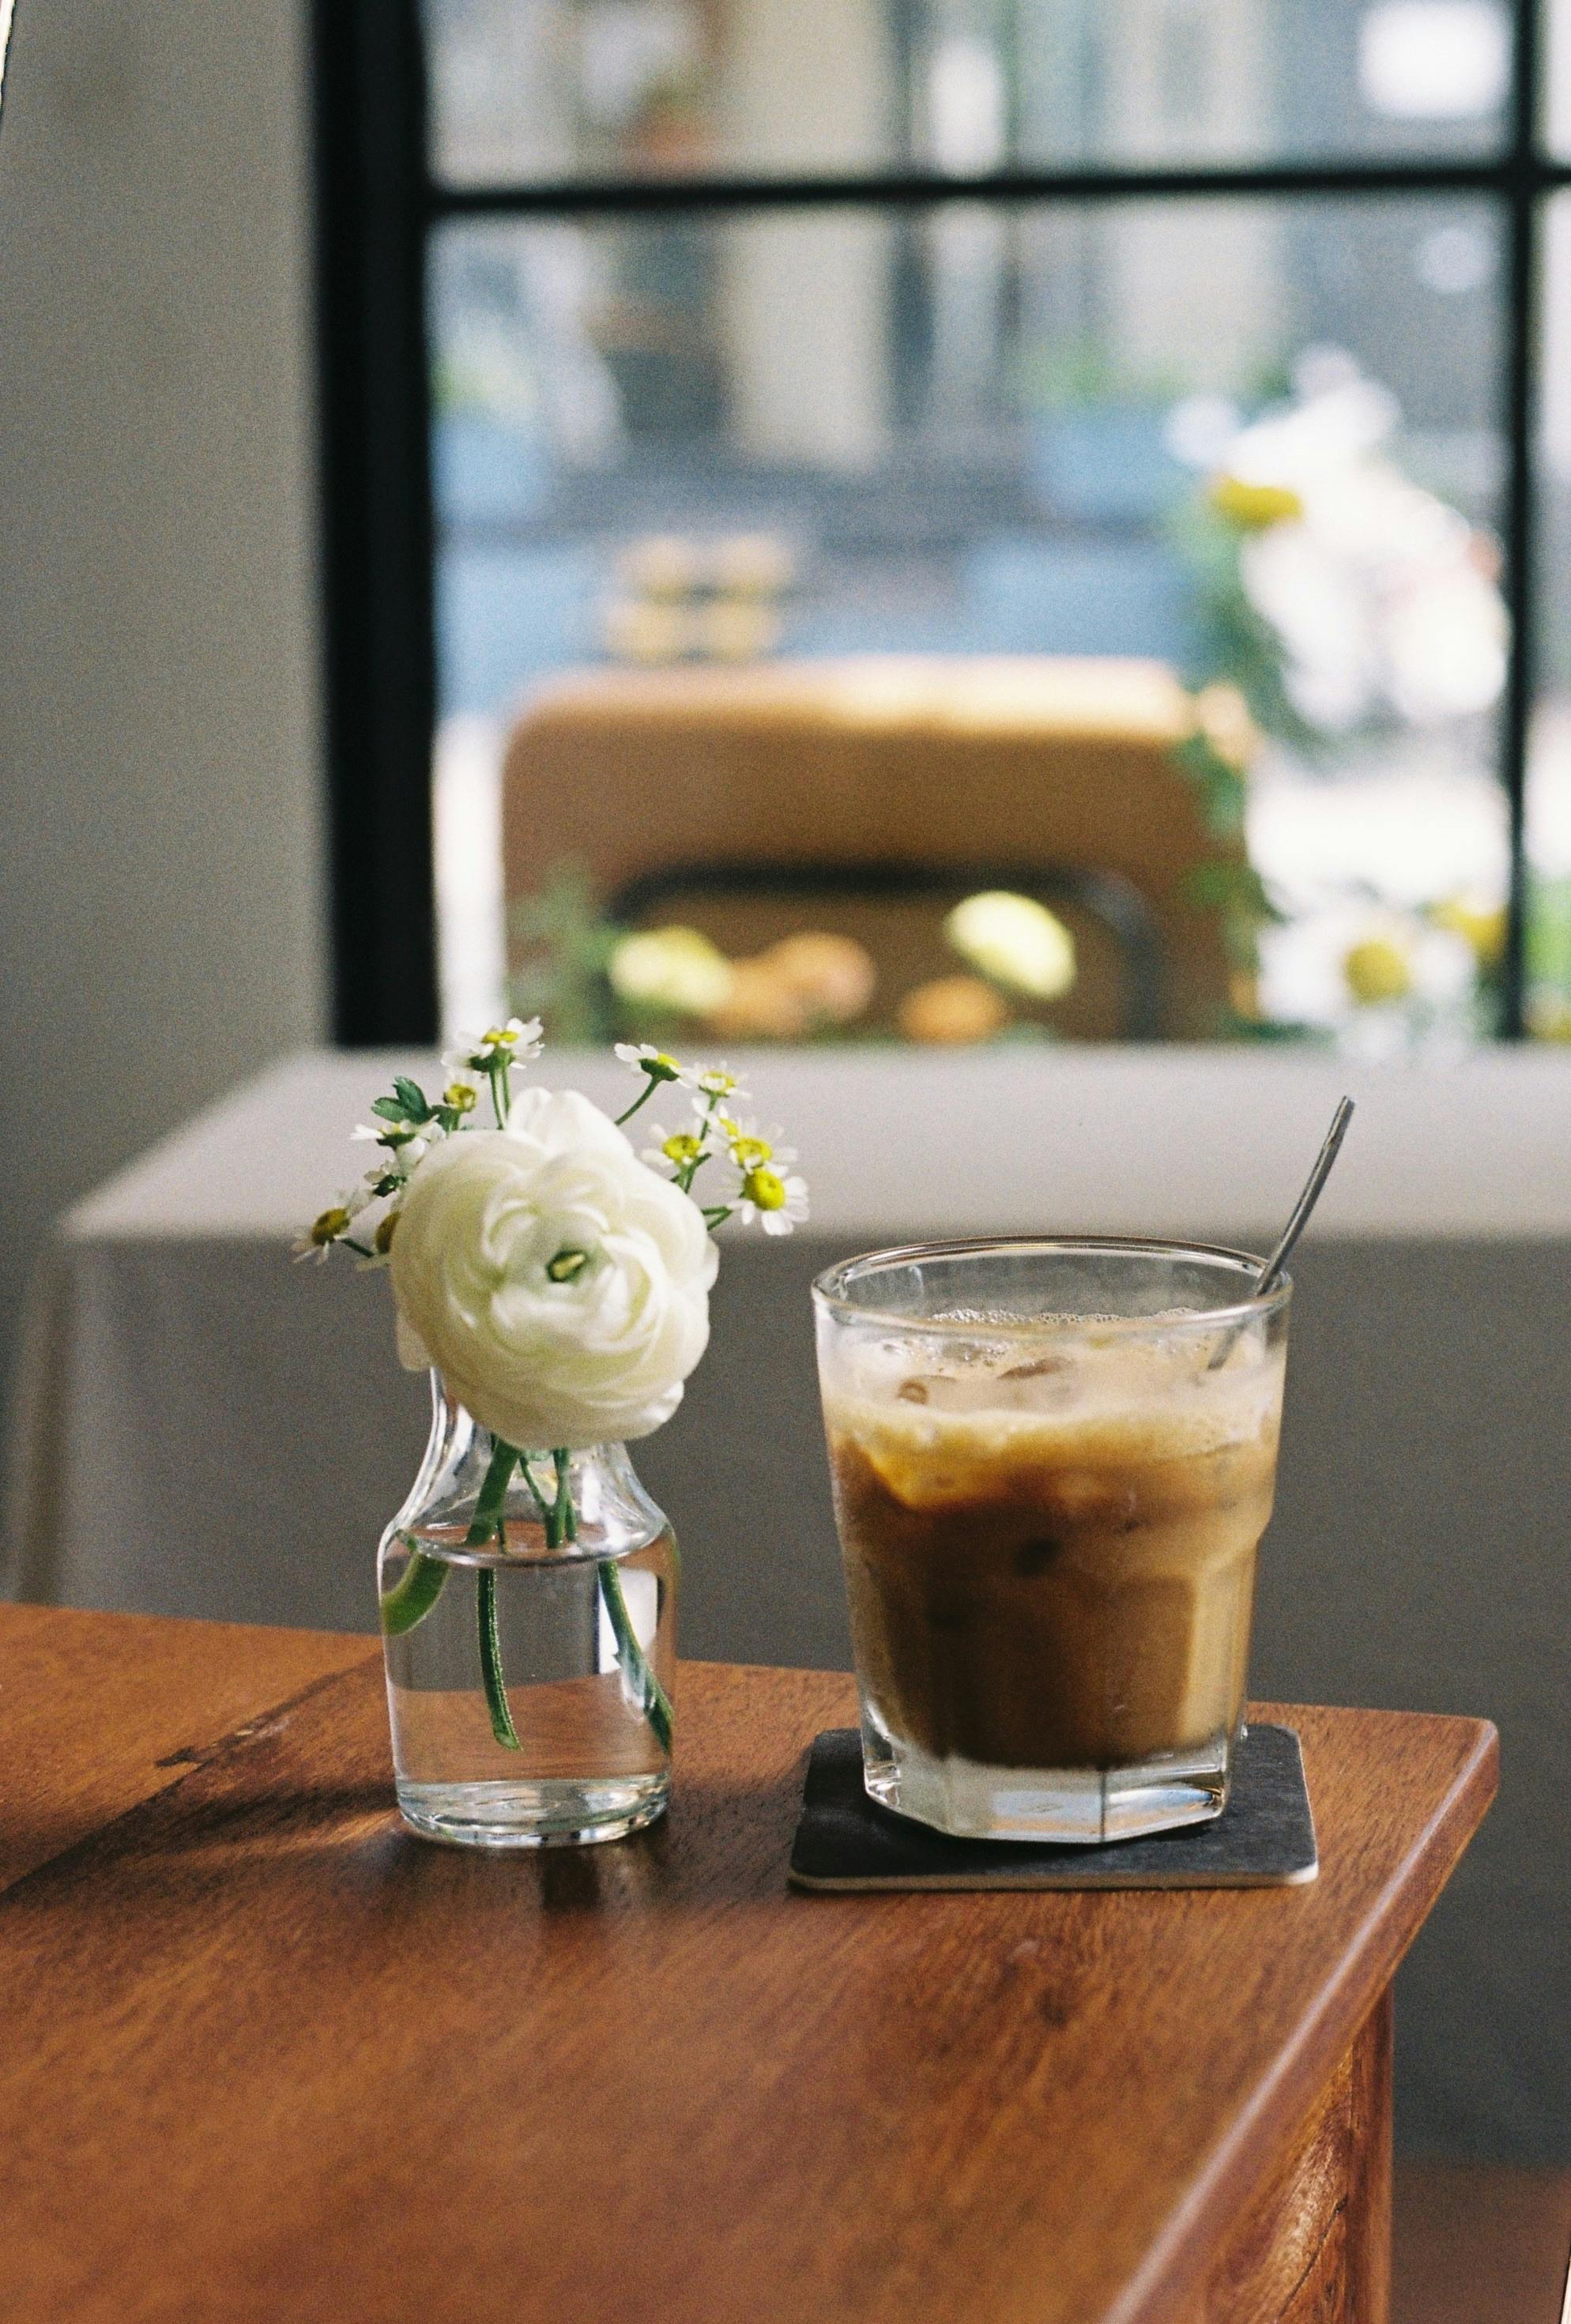 Premium Photo  Iced latte coffee in takeaway glass on table in coffee shop  cafe restaurant